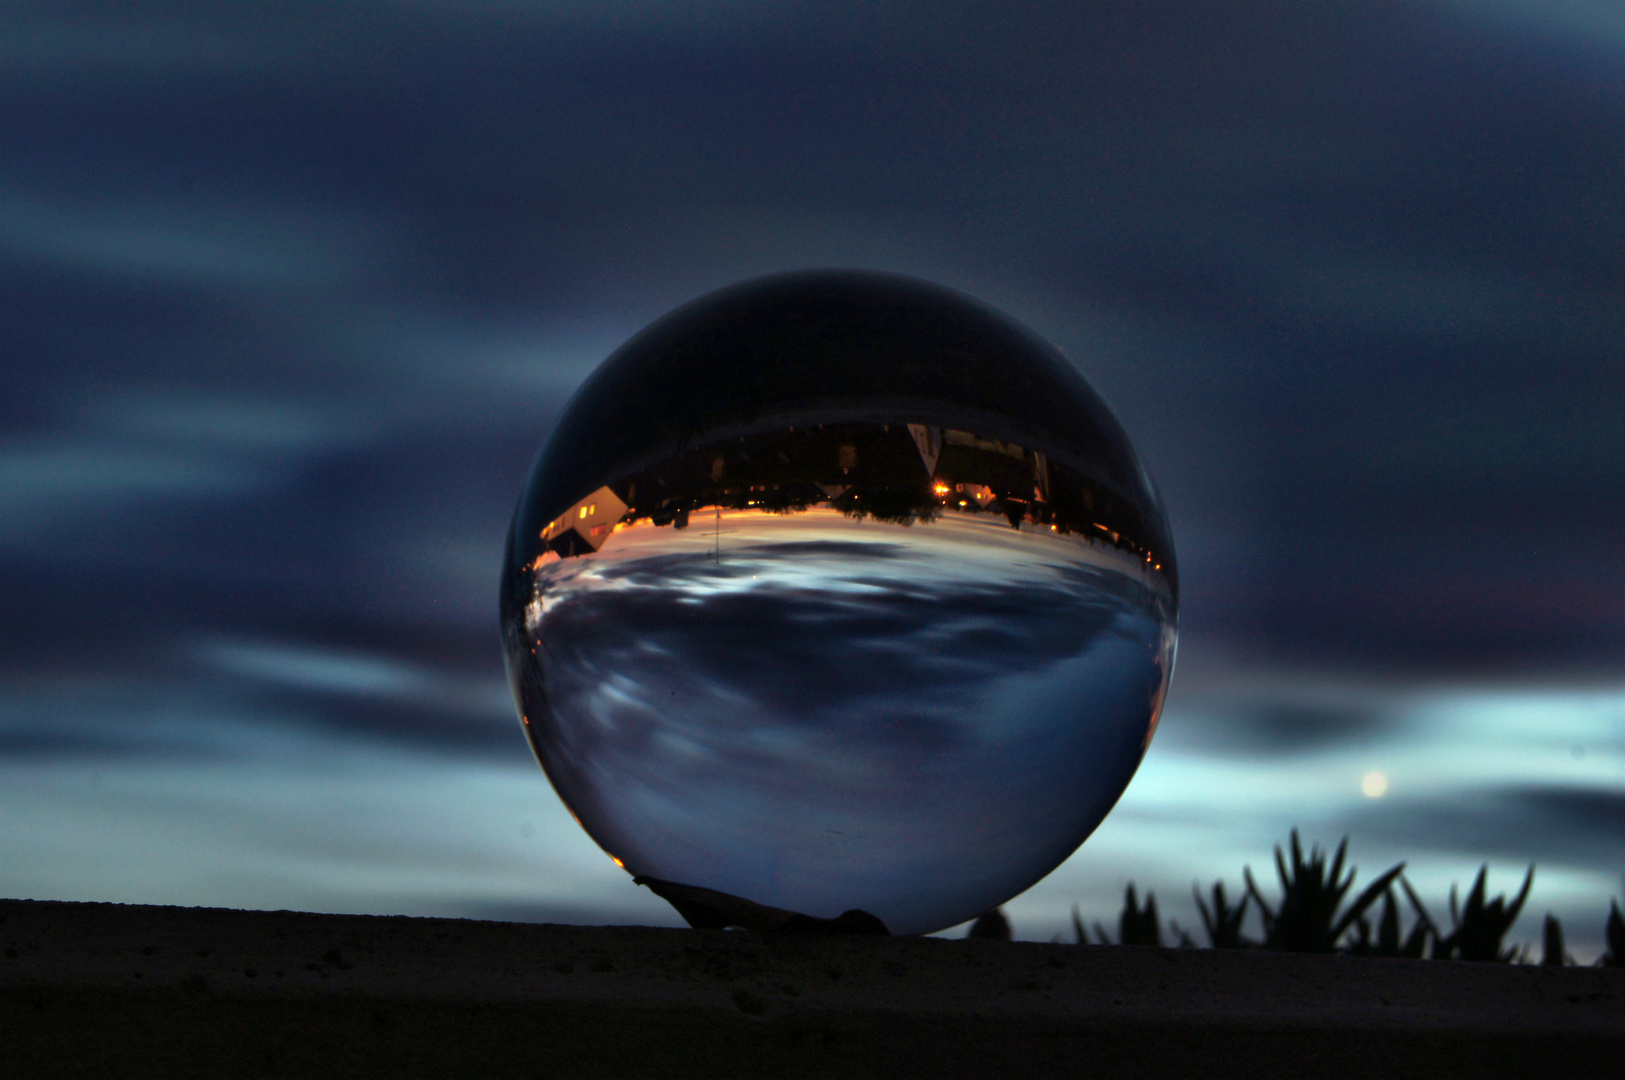 Evening mood with crystal ball